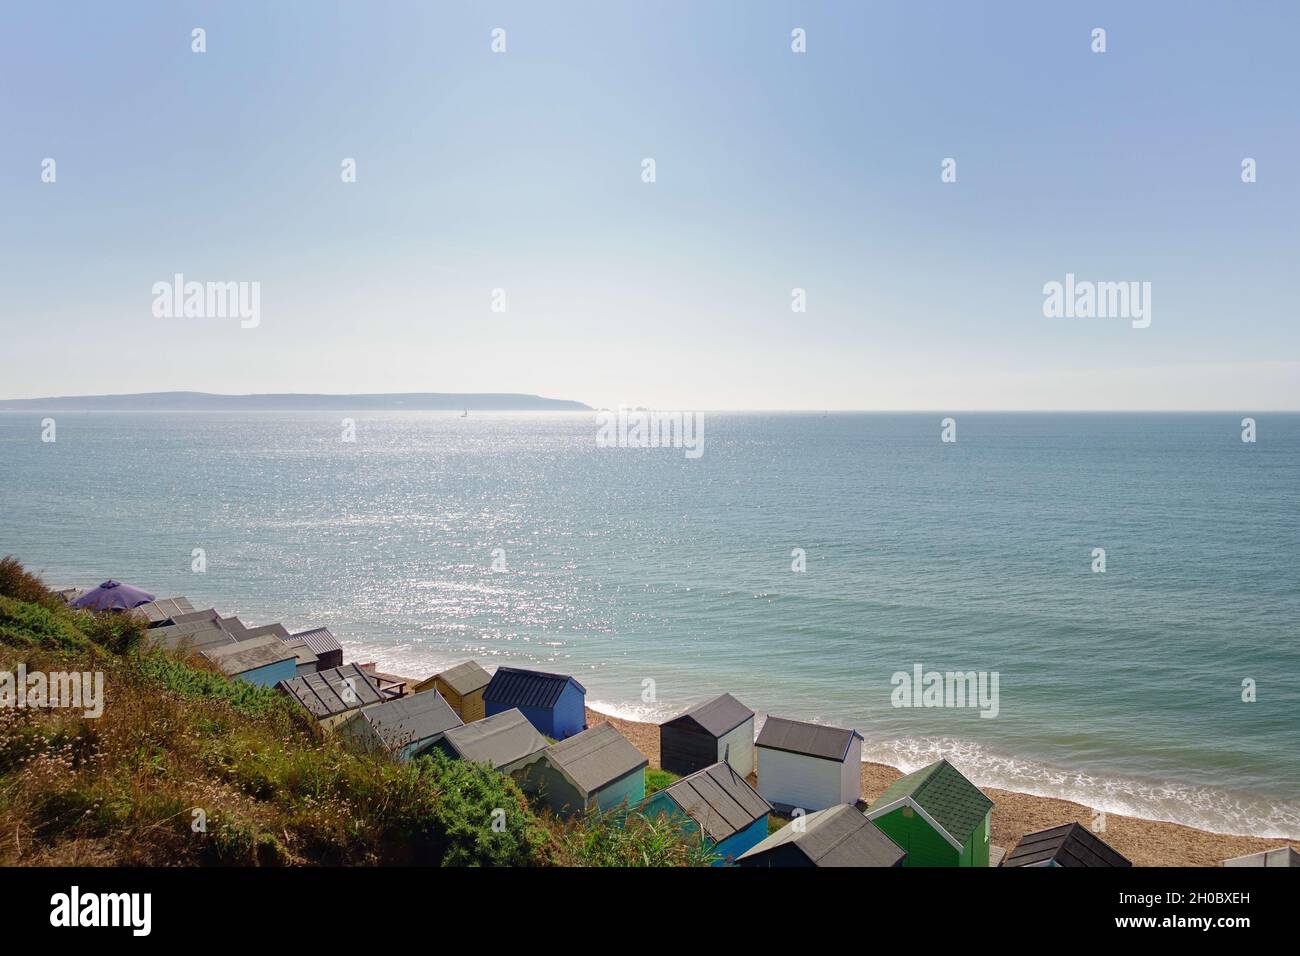 Beach huts on Hordle cliff beach with the Isle of Wight in the background Stock Photo